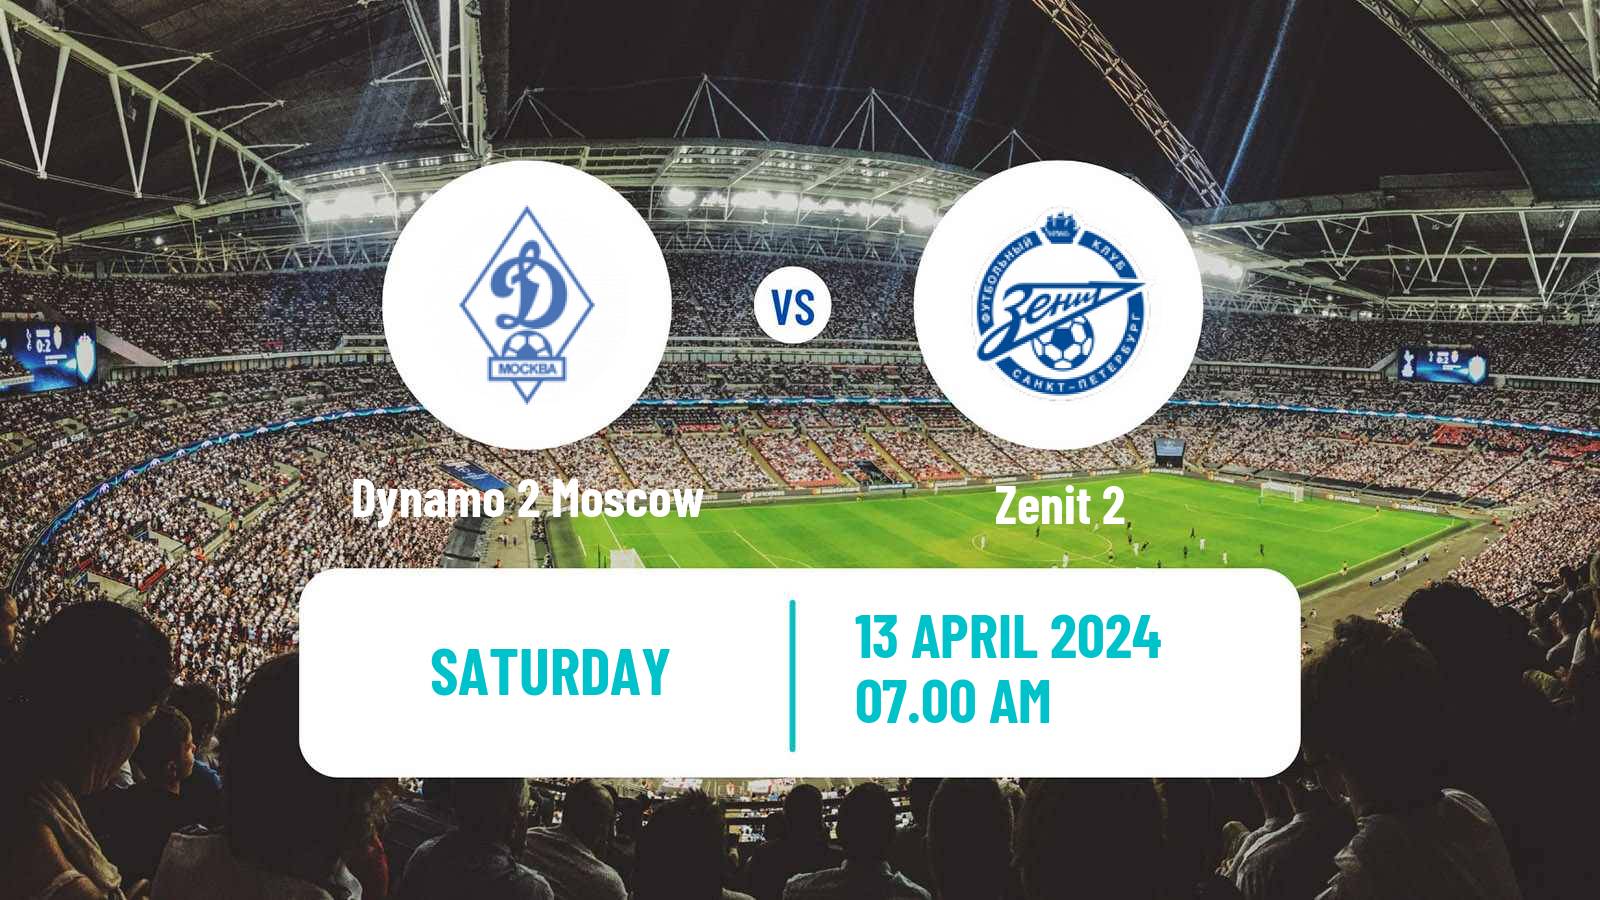 Soccer FNL 2 Division B Group 2 Dynamo 2 Moscow - Zenit 2